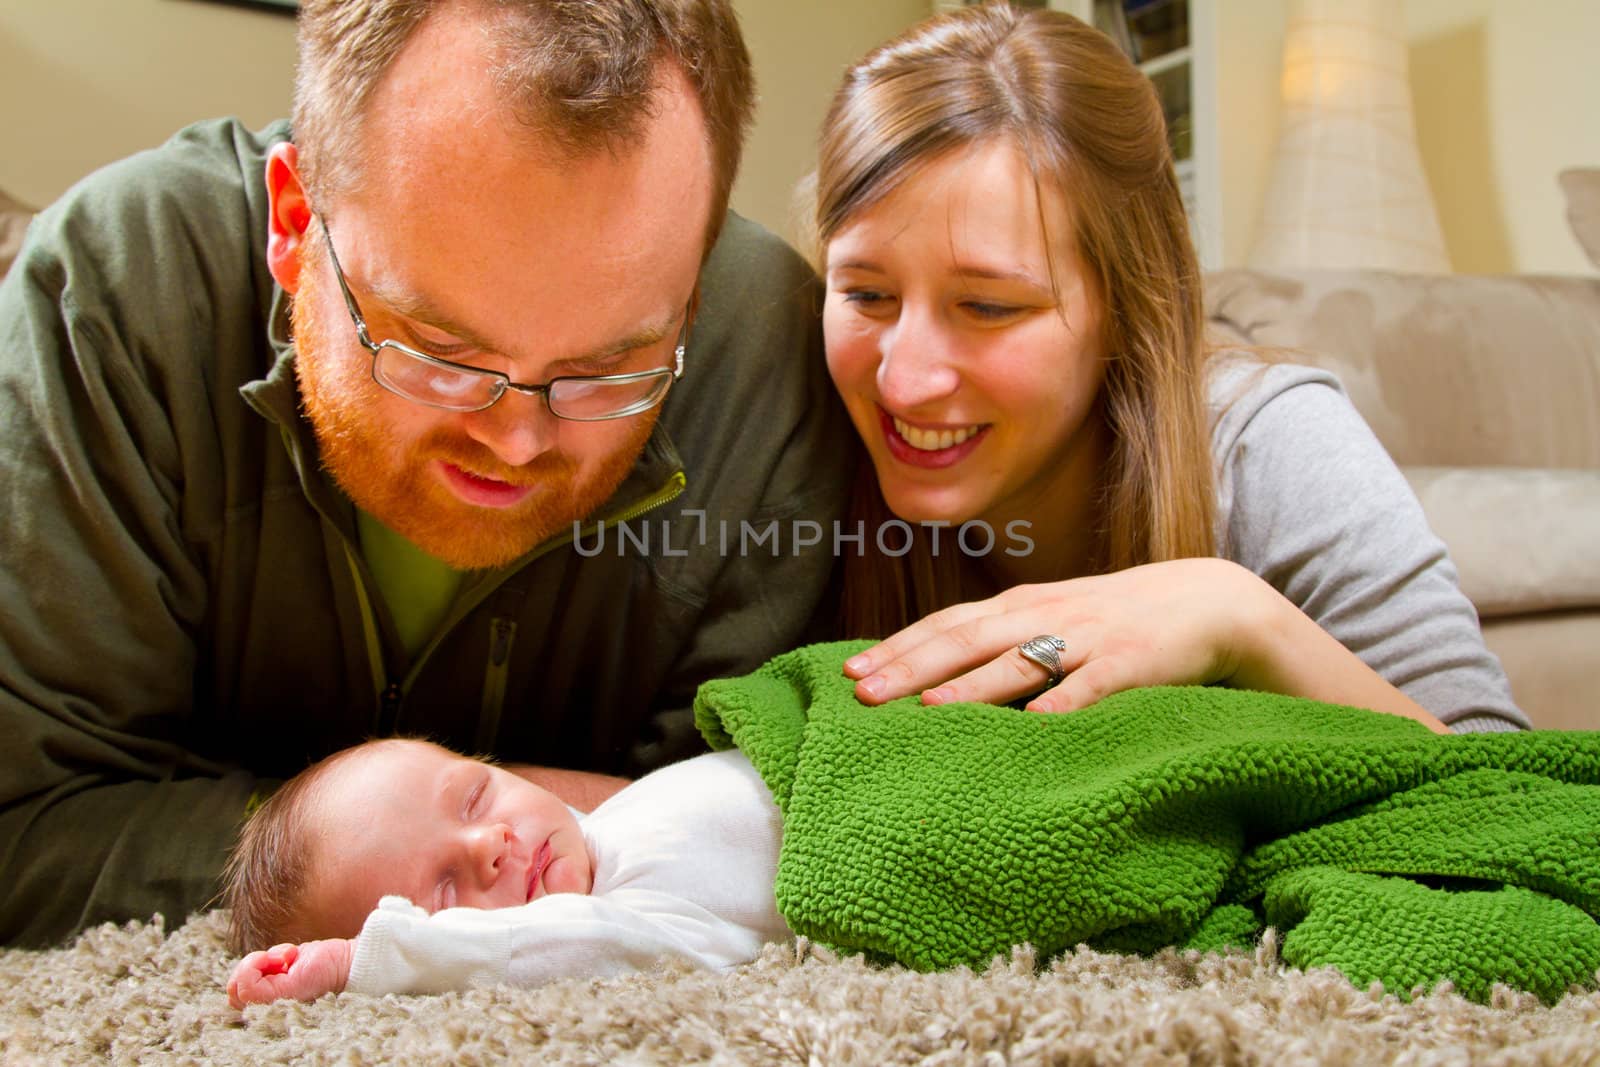 A newborn baby's parents gaze over him while he sleeps. The mother and father look very happy and the baby boy is sleeping peacefully.